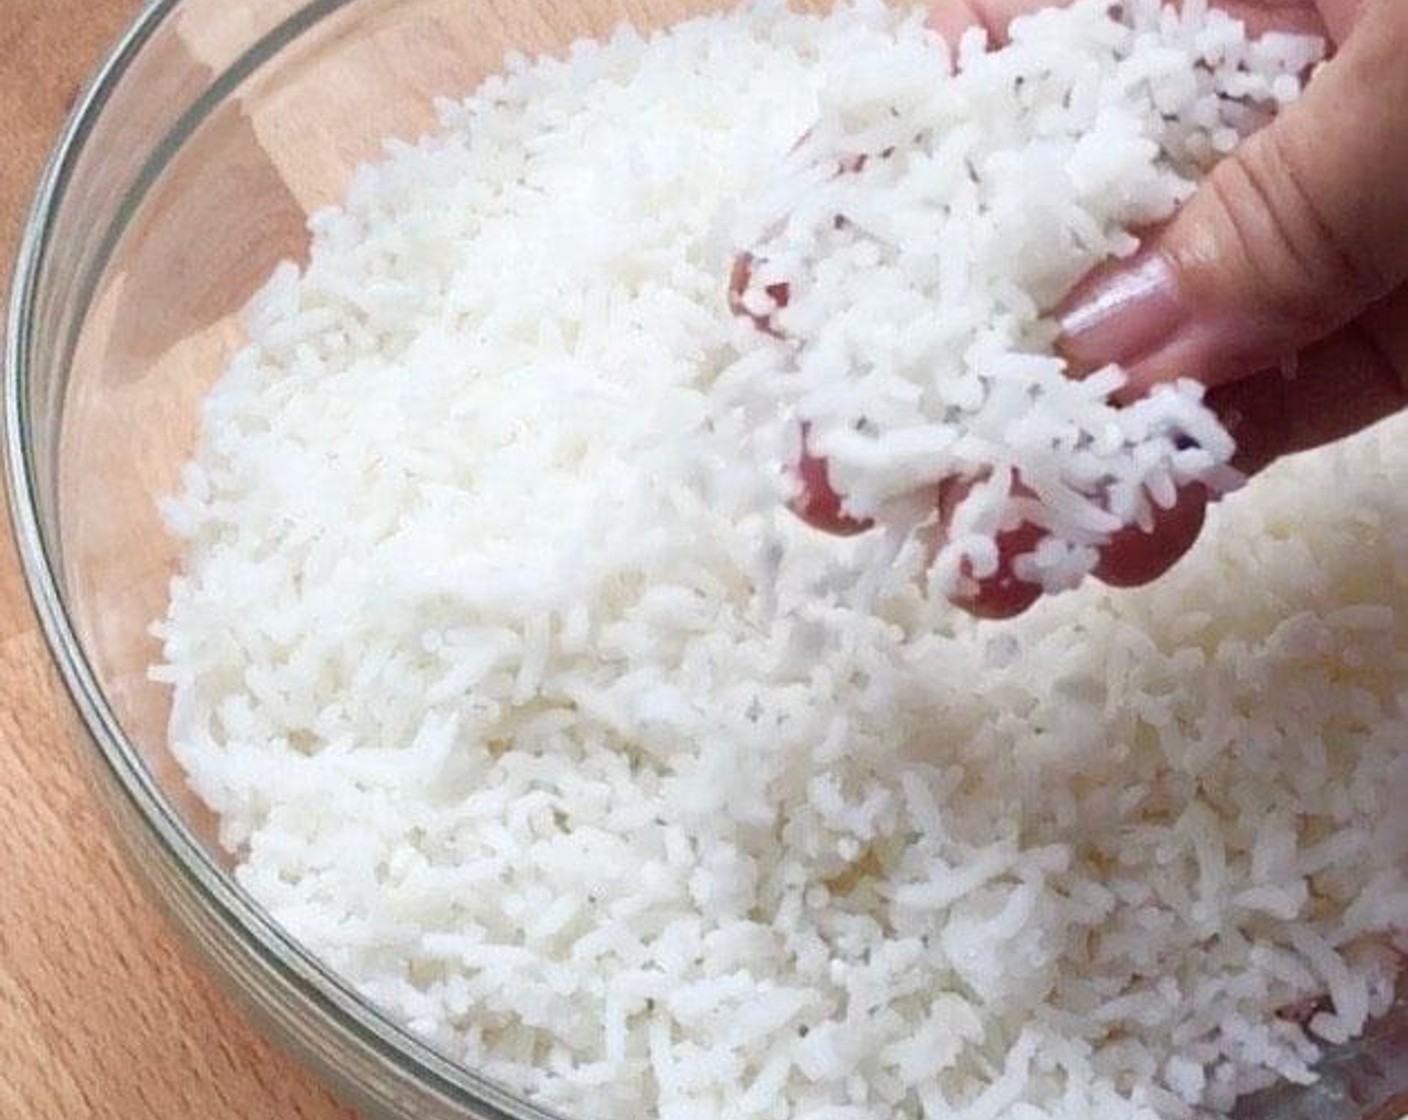 step 1 Wet your fingers and run through the White Rice (1 cup) to remove any clumps.